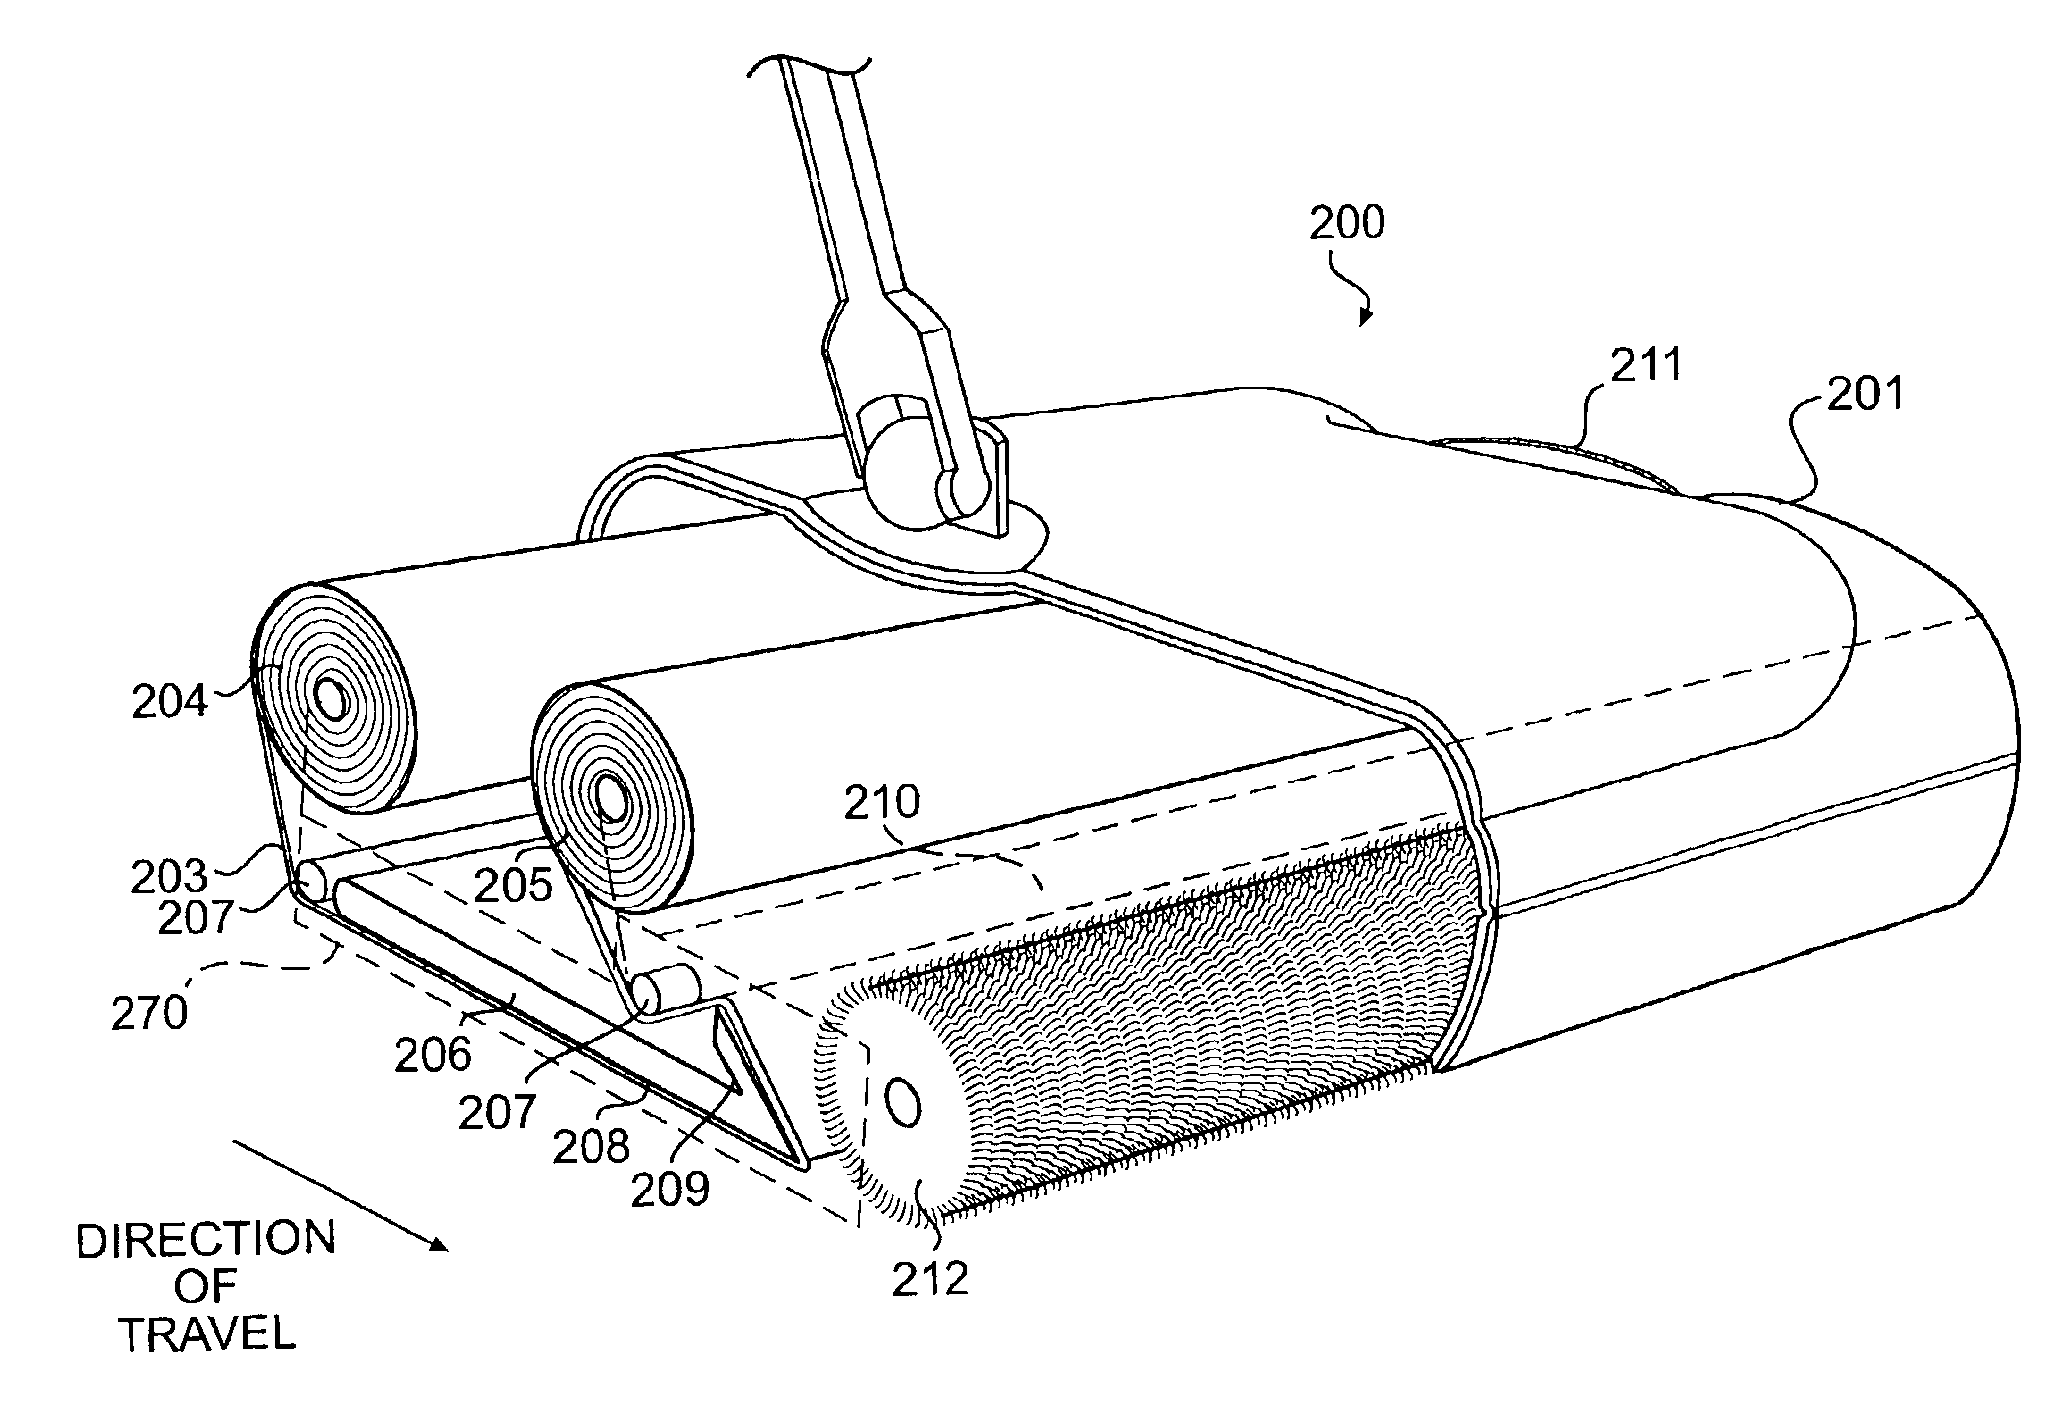 Cleaning apparatus with continuous action wiping and sweeping